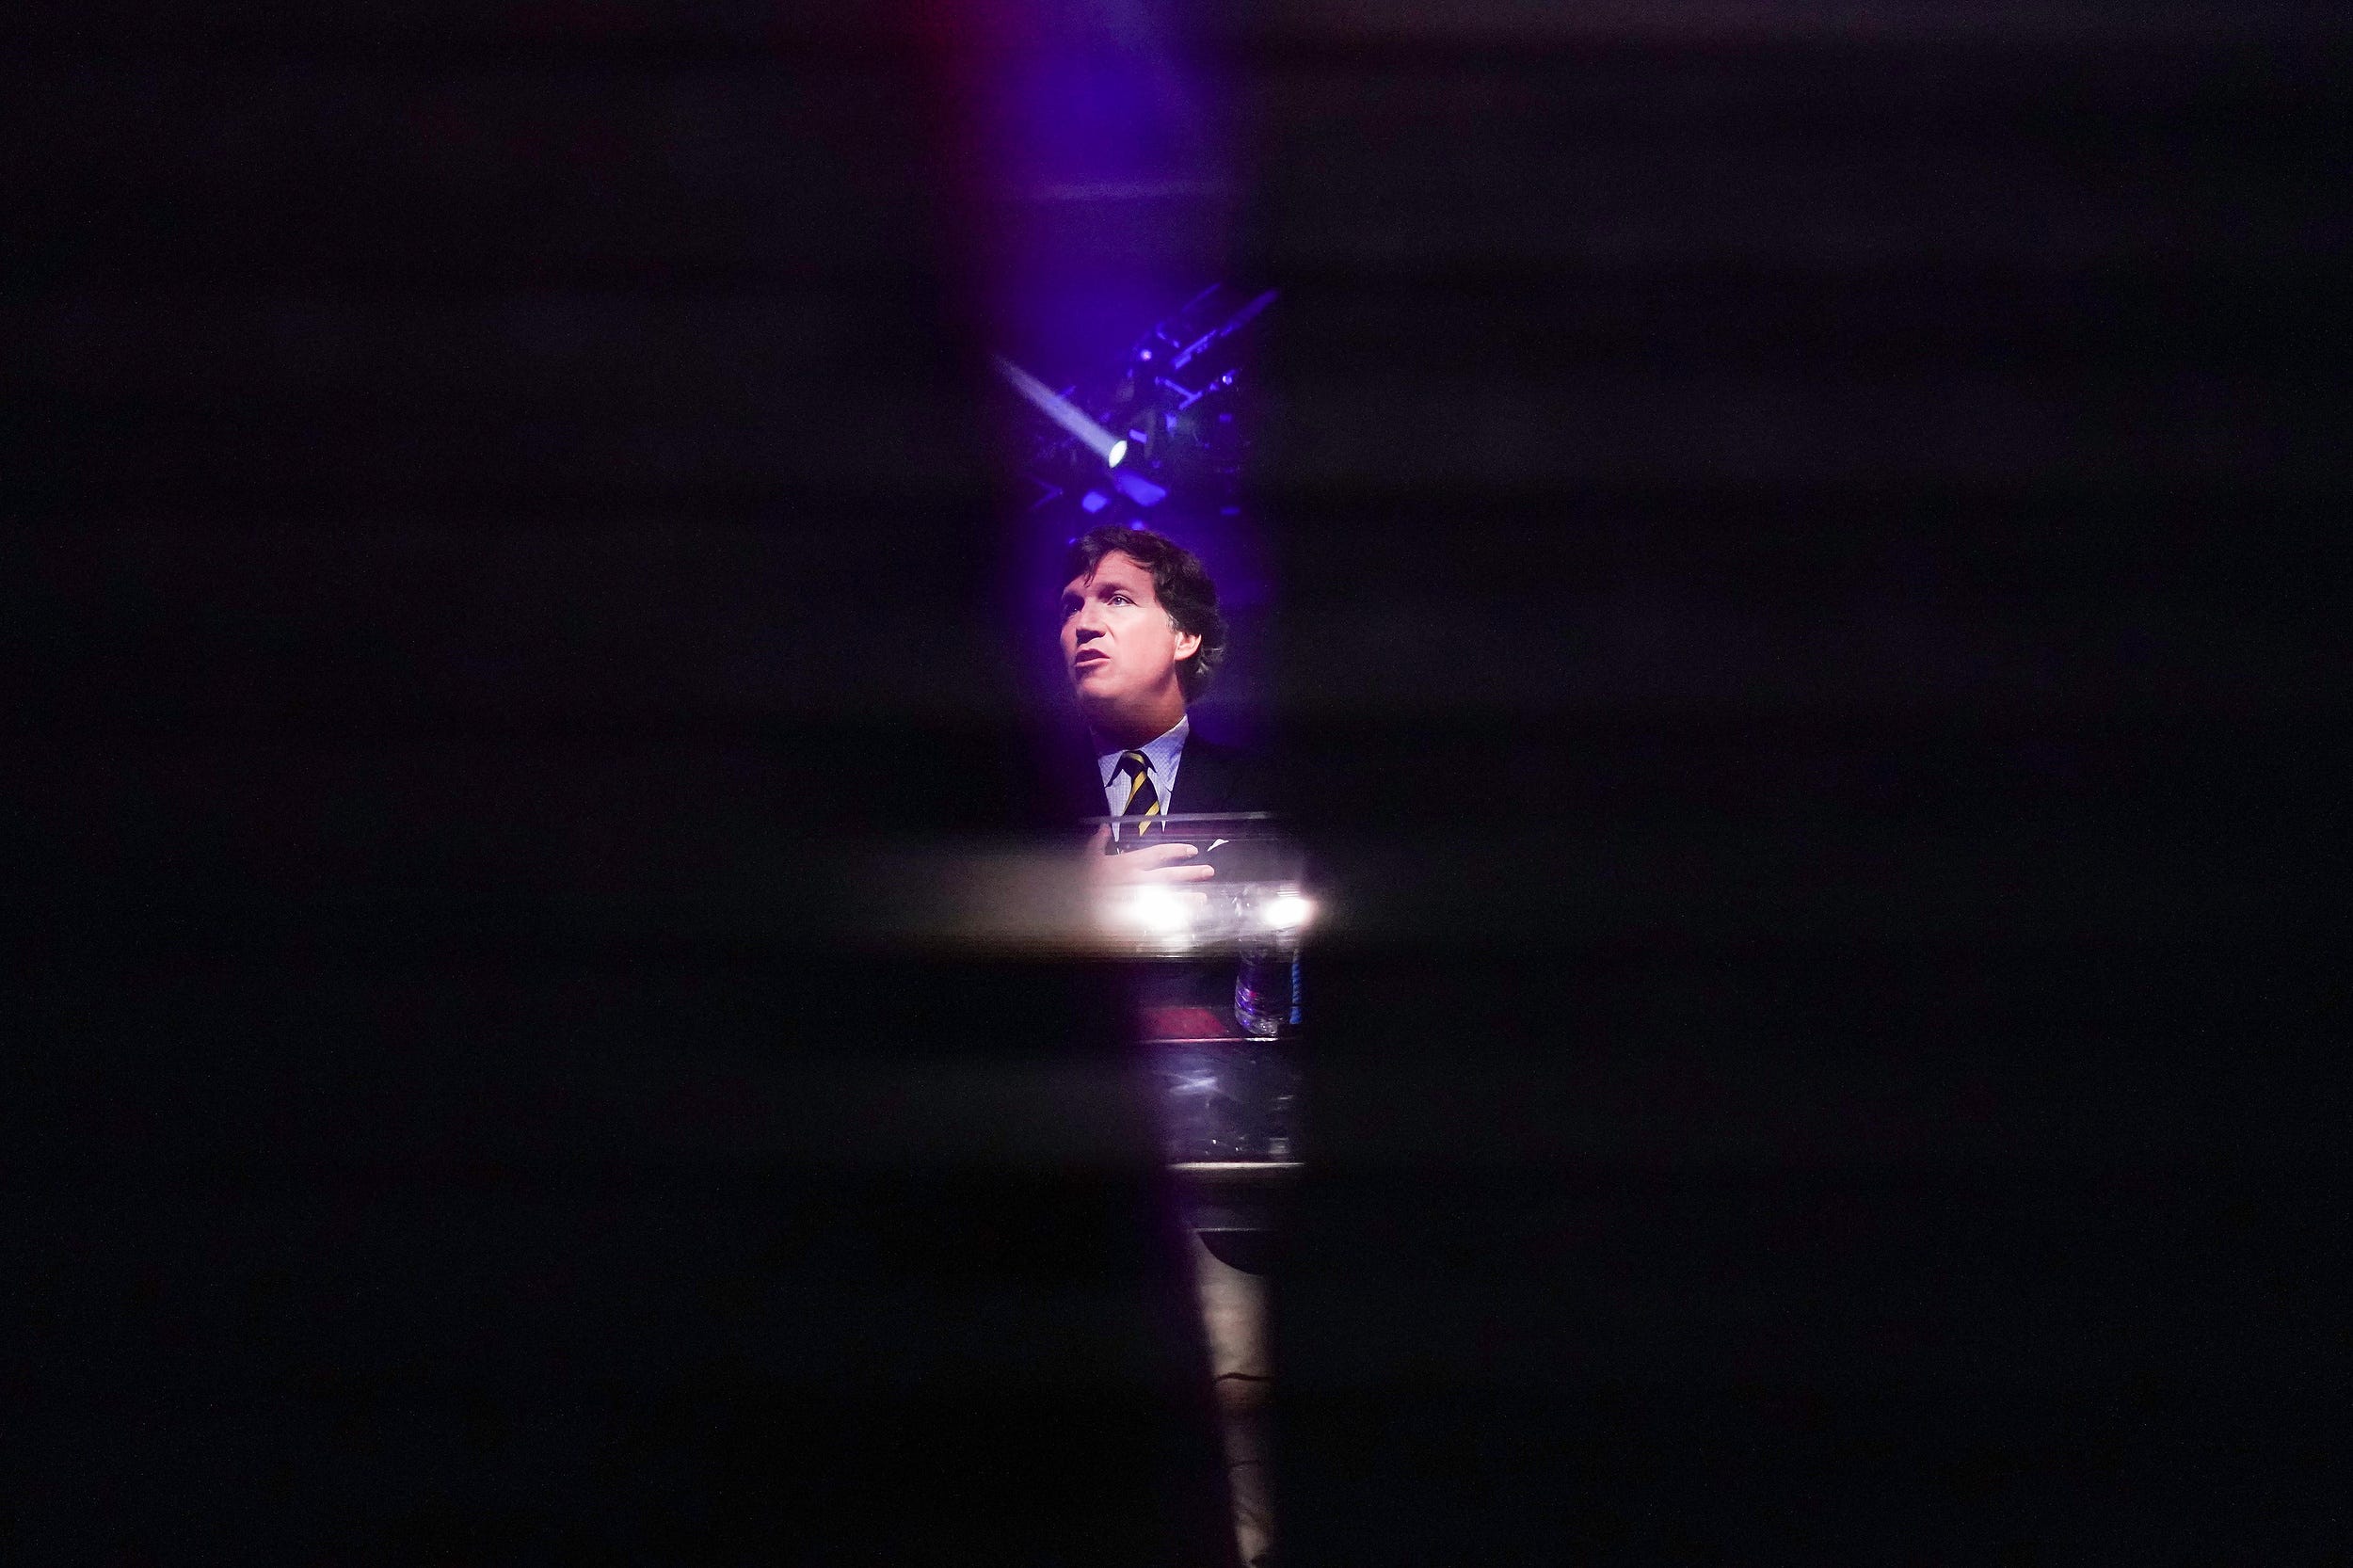 Tucker Carlson speaks during the first day of the America Fest 2021 hosted by Turning Point USA on Saturday, Dec. 18, 2021, in Phoenix.Uscp 7iwow2har2f6a3xo8hb Original